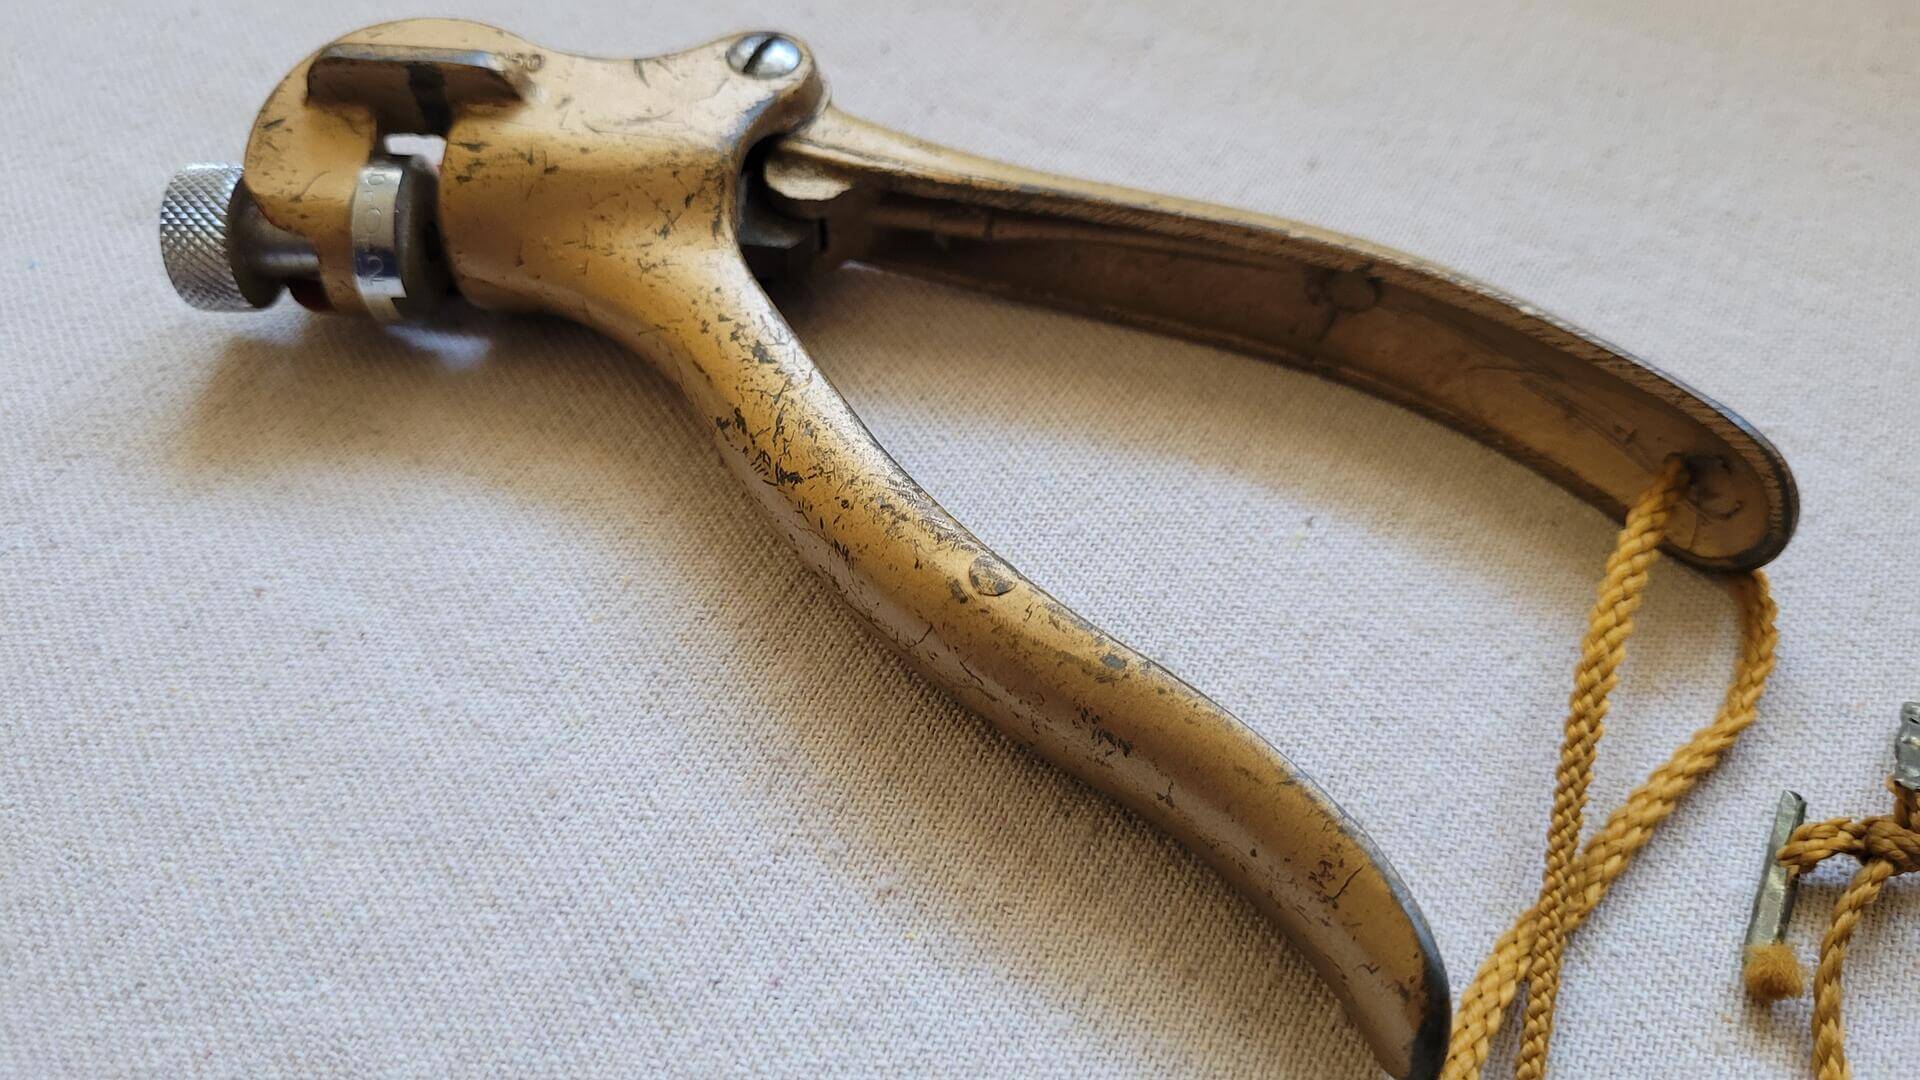 Vintage Somax No. 250 sawset pliers with 4-12 TPI adjustable wheel. Antique MCM made in Japan collectible sawing and cutting specialty hand tools